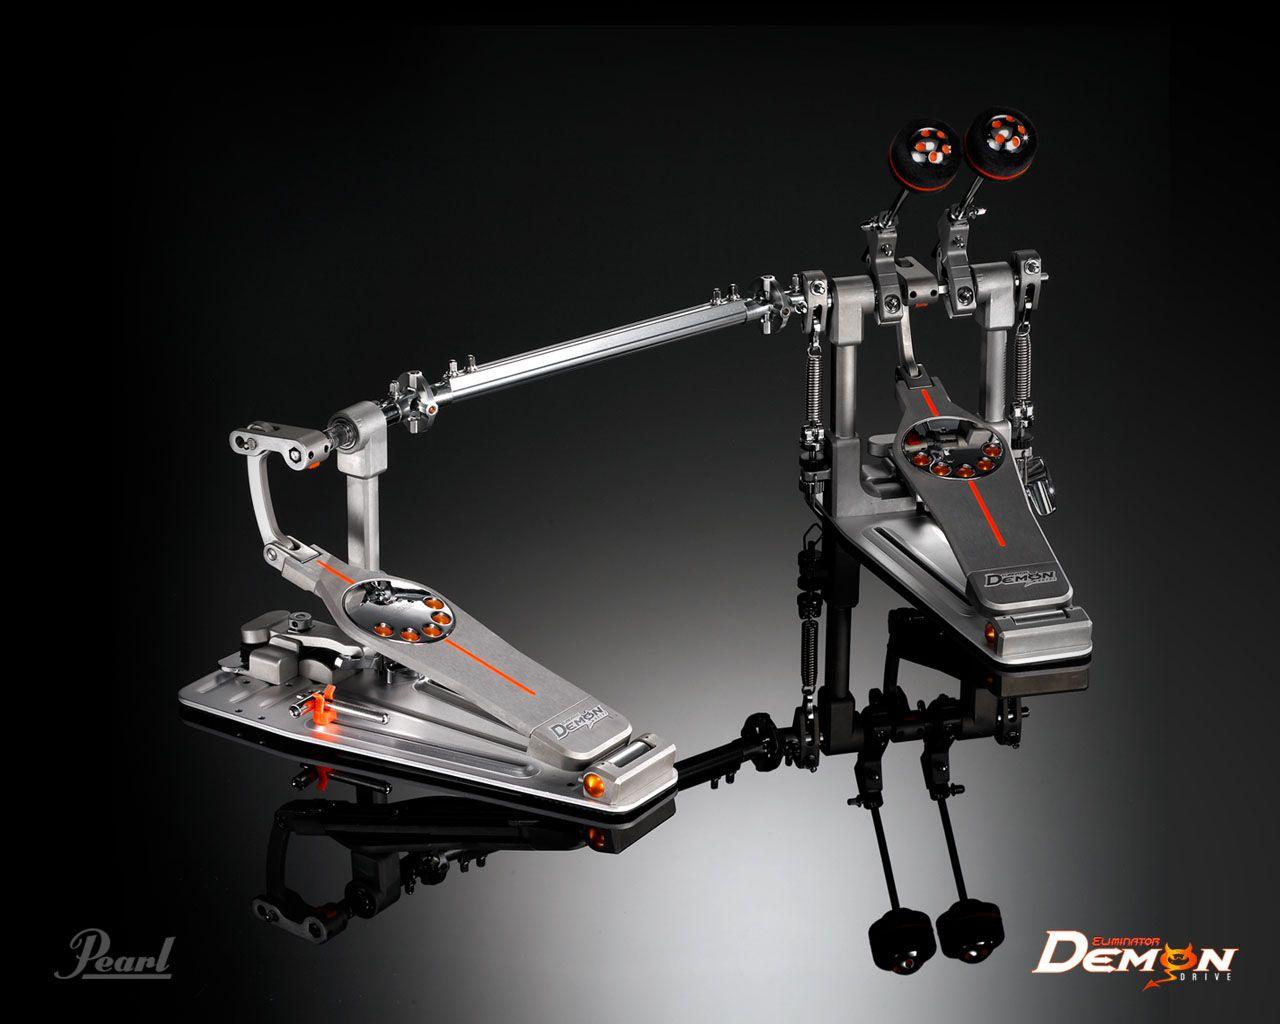 Pedal Drums Pearl Music HD Wallpaper